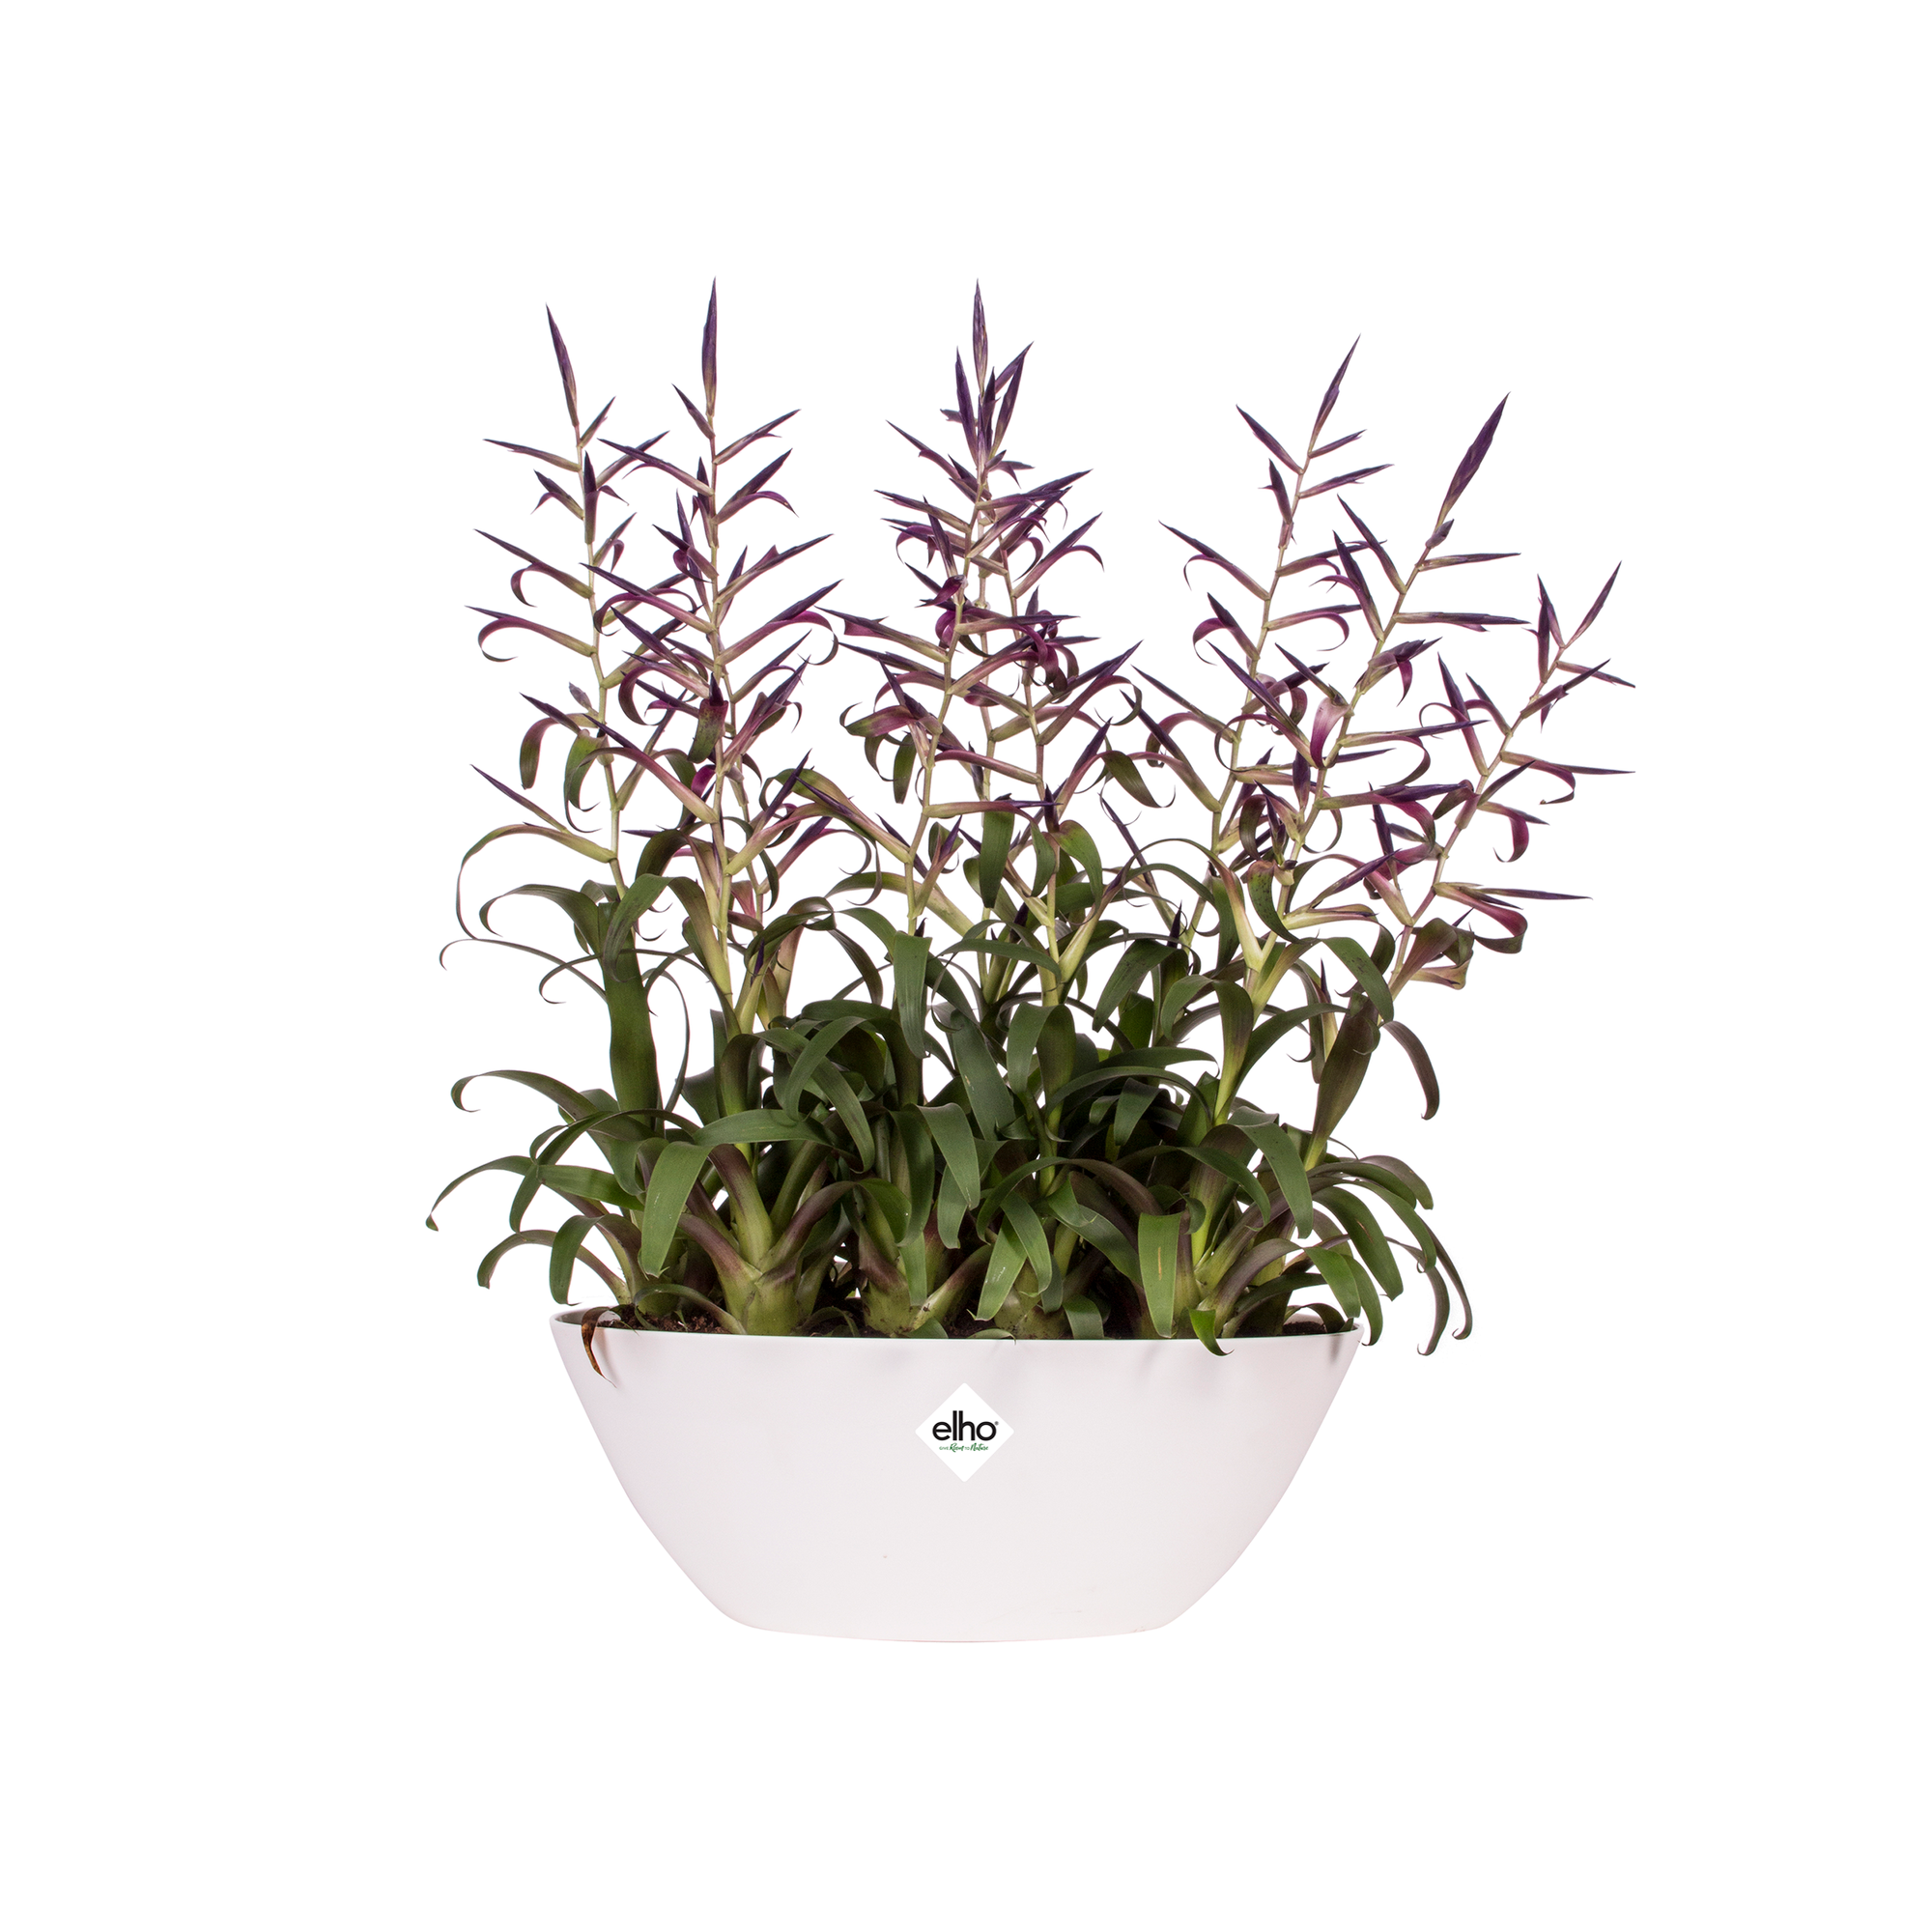 brussels oval room - to - 36cm weiss elho® nature Give